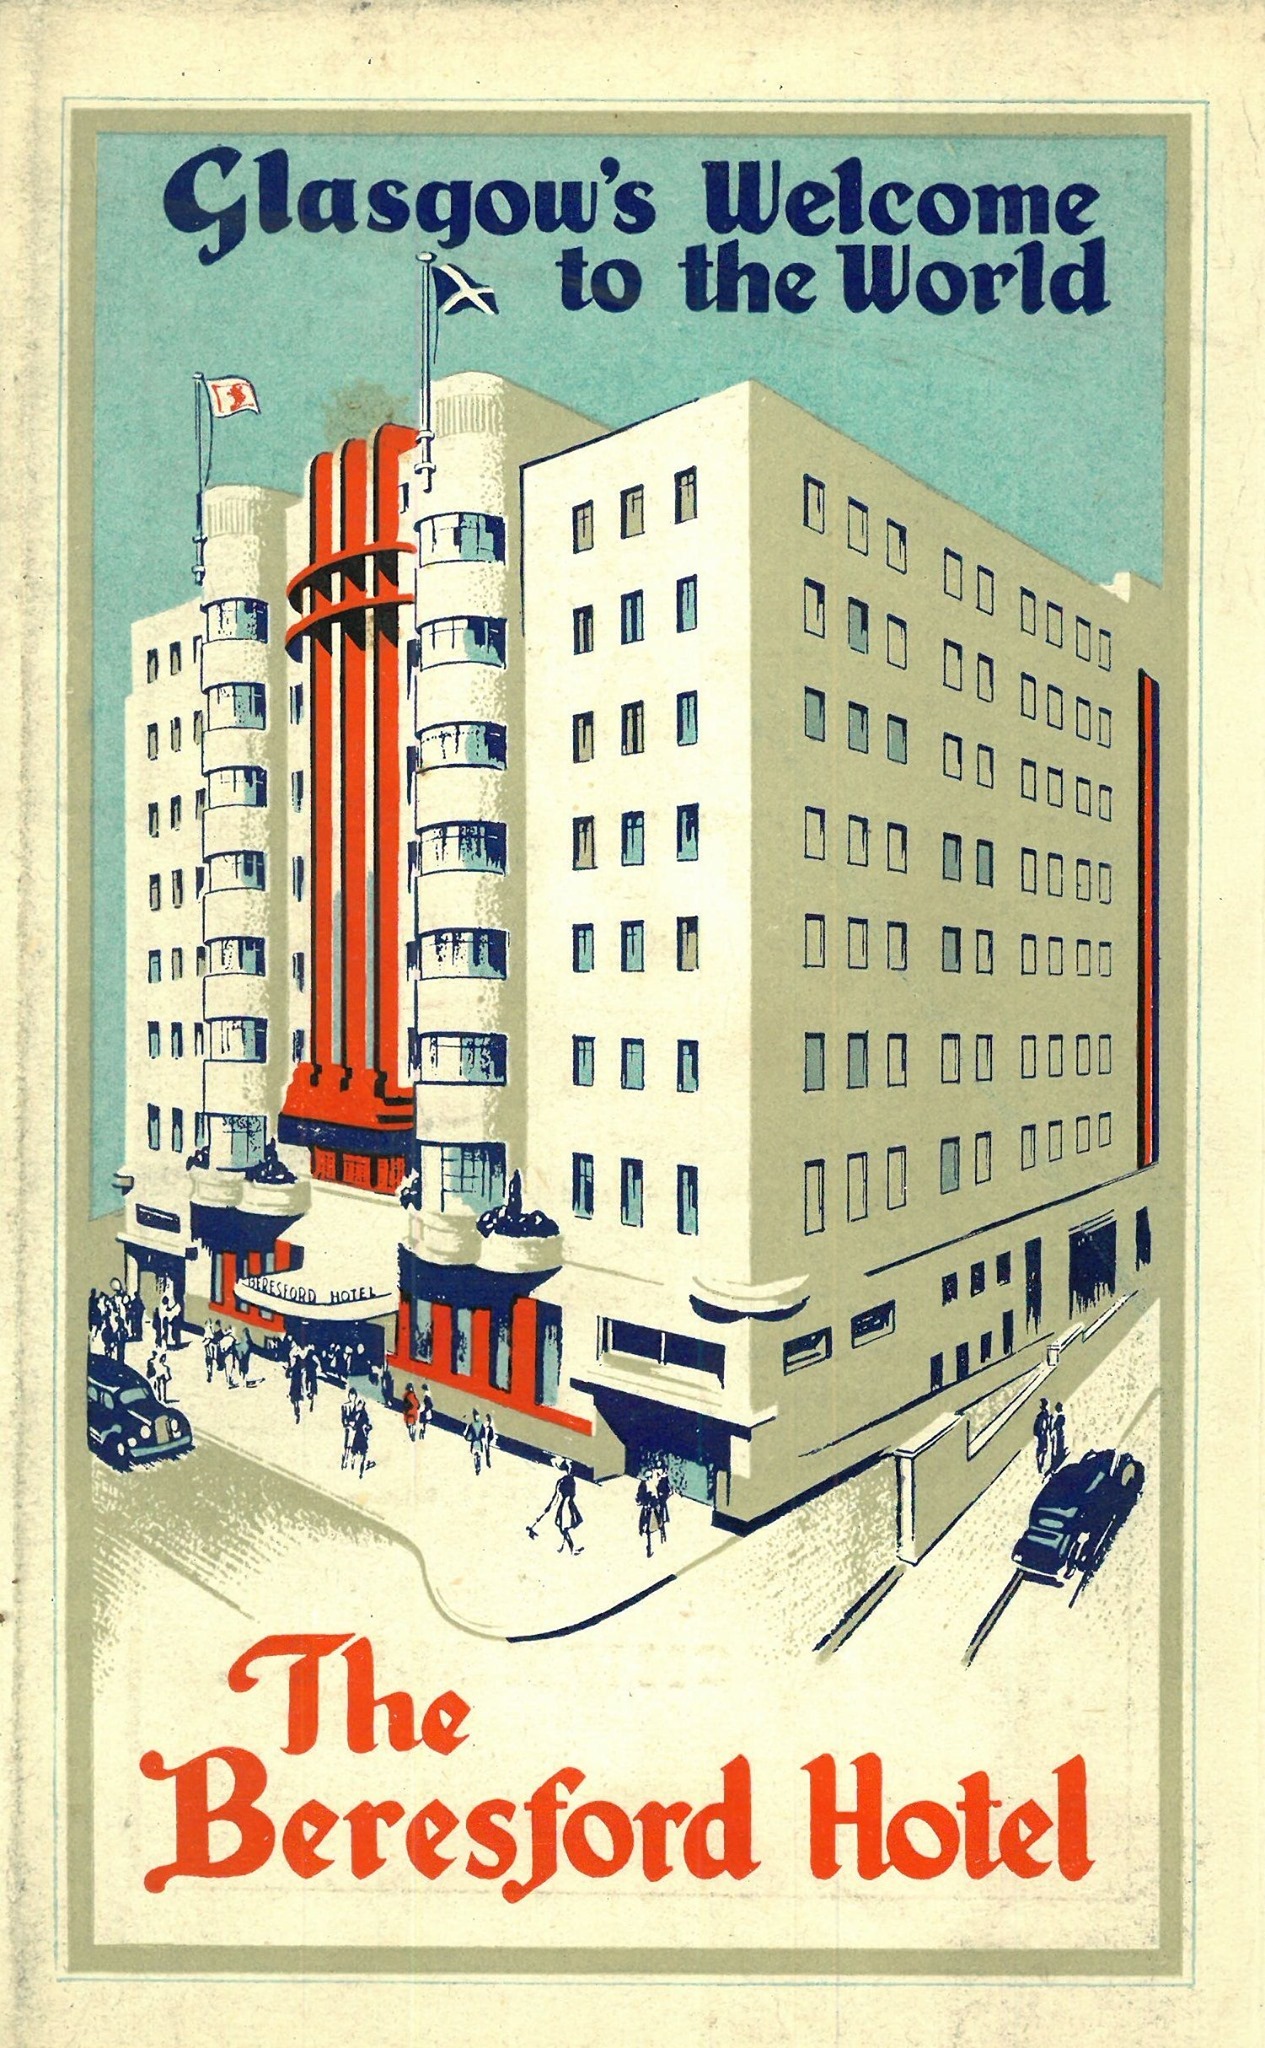 Beresford Hotel illustration for opening,1938 Pic: Glasgow City Archives